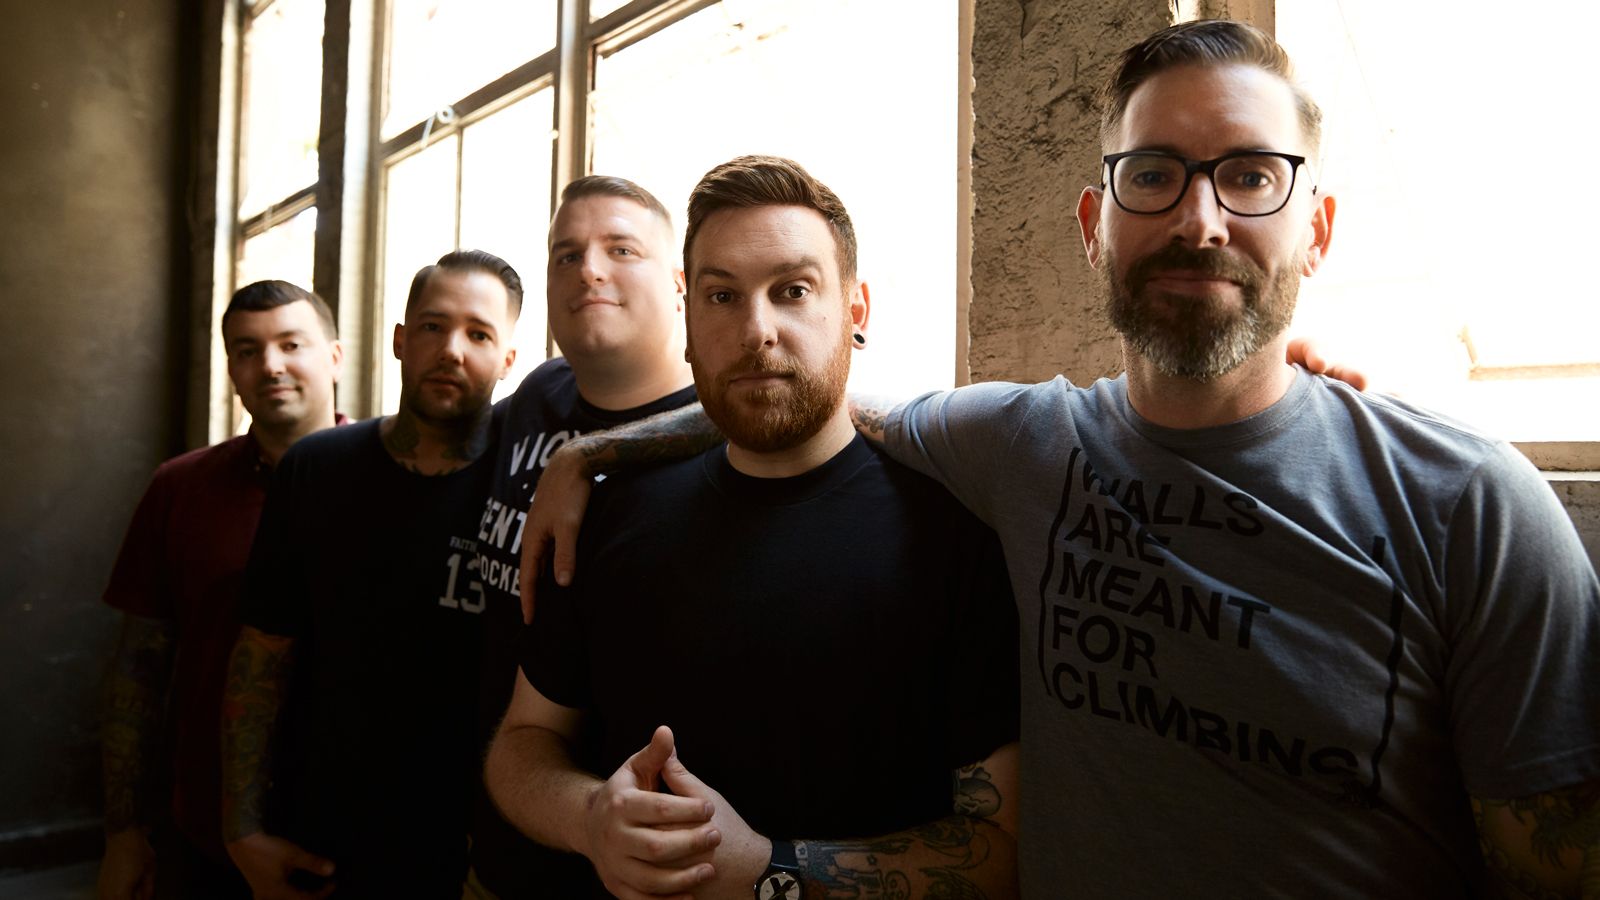 Listen to The Ghost Inside's Aggressive New Song, Pressure Point